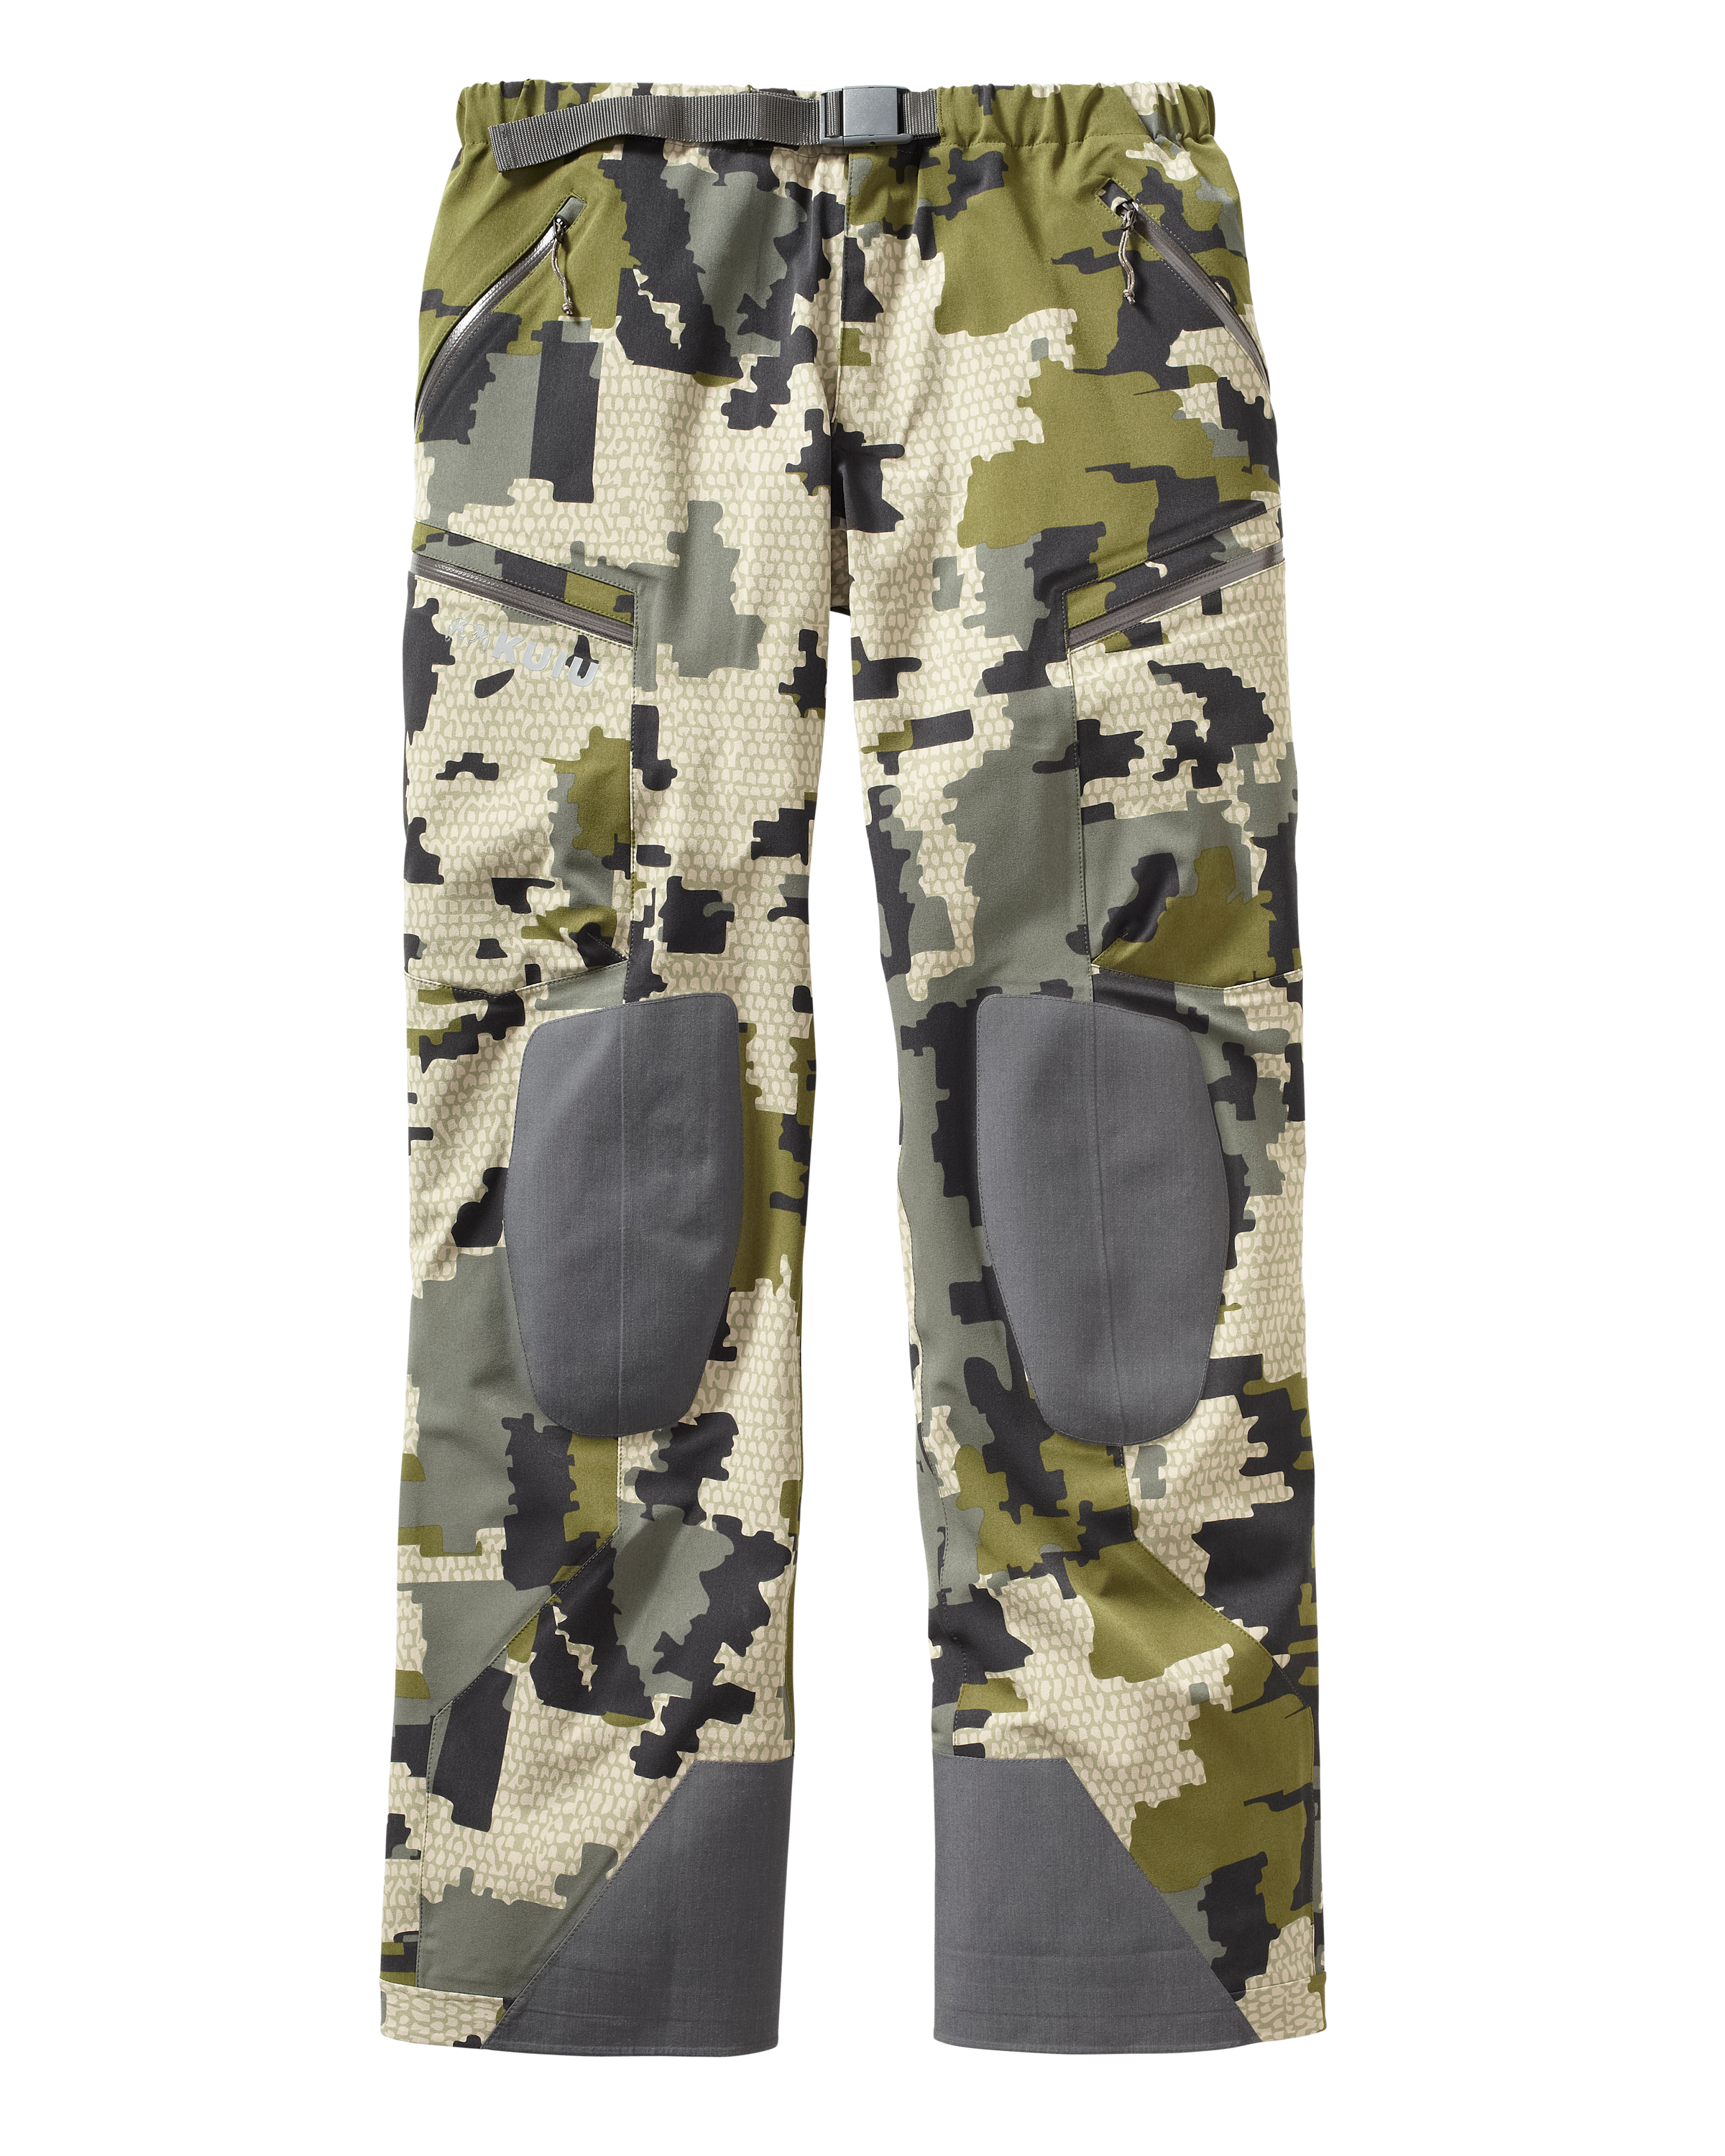 KUIU Outlet Yukon Rain Hunting Pant in Verde | Size Small